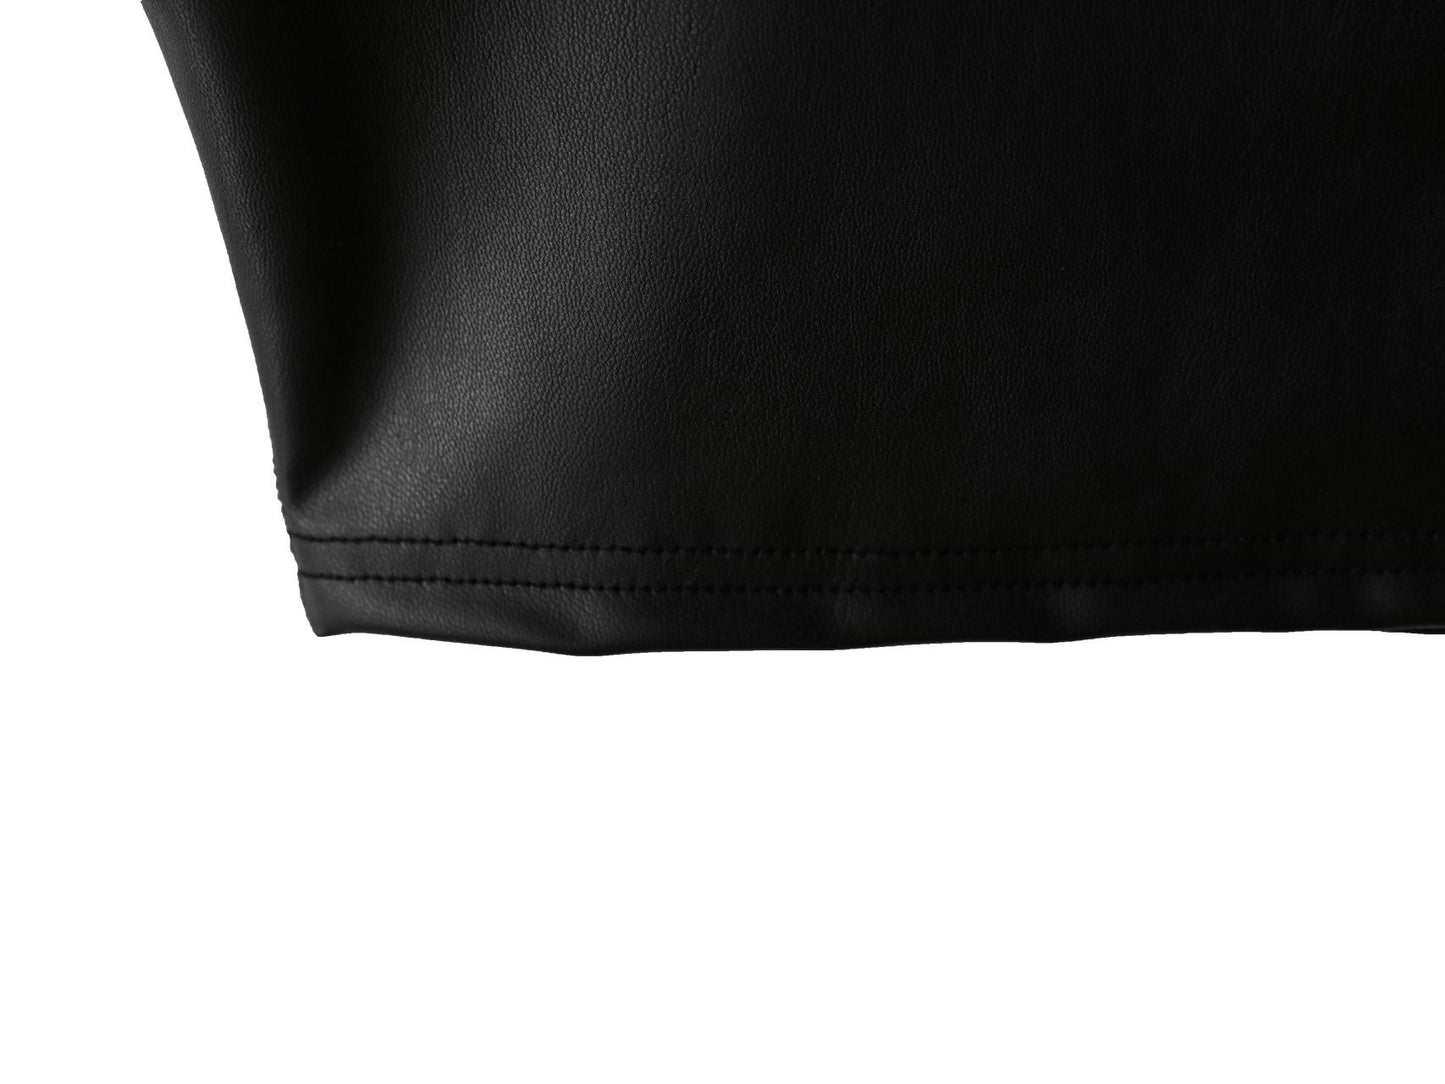 [PAPERMOON] SS / Vegan Leather Cropped Sleeveless Tank Top